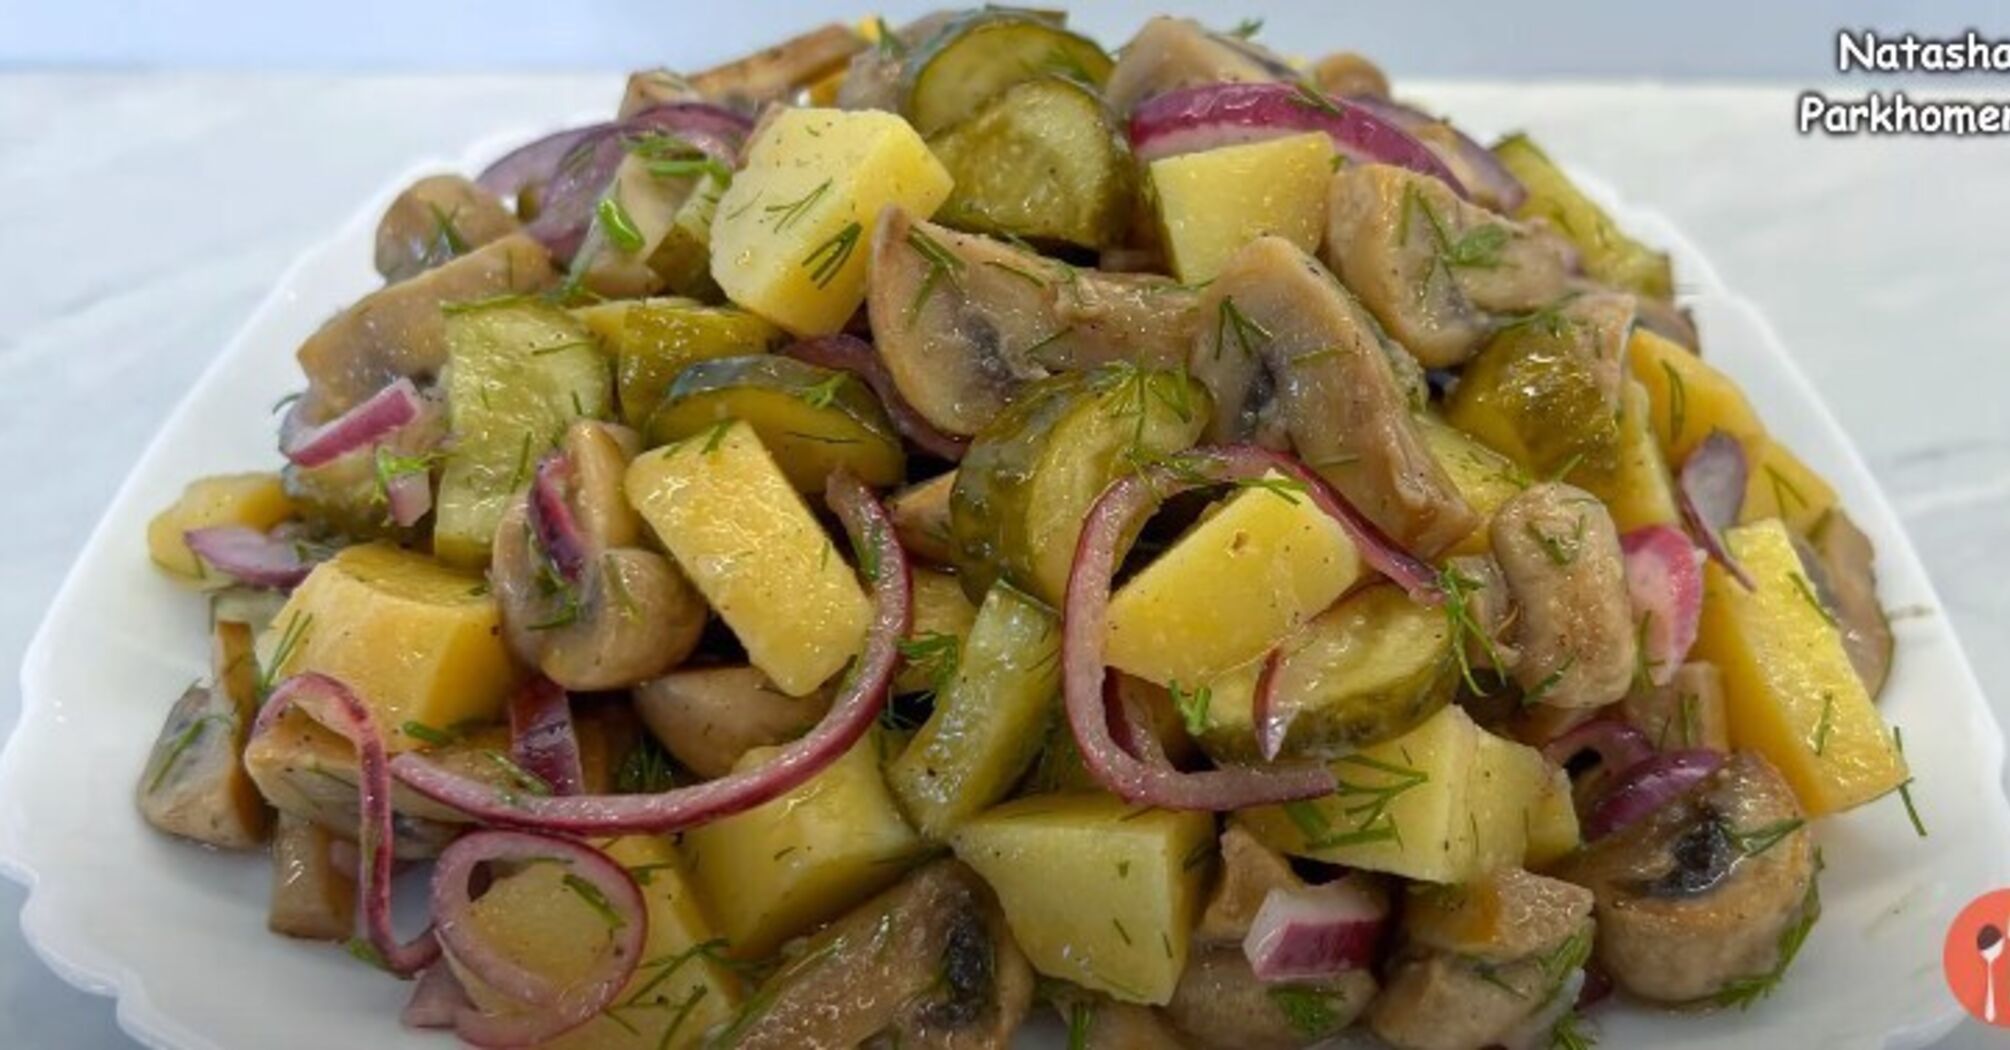 Recipe for potato and mushroom salad without mayonnaise